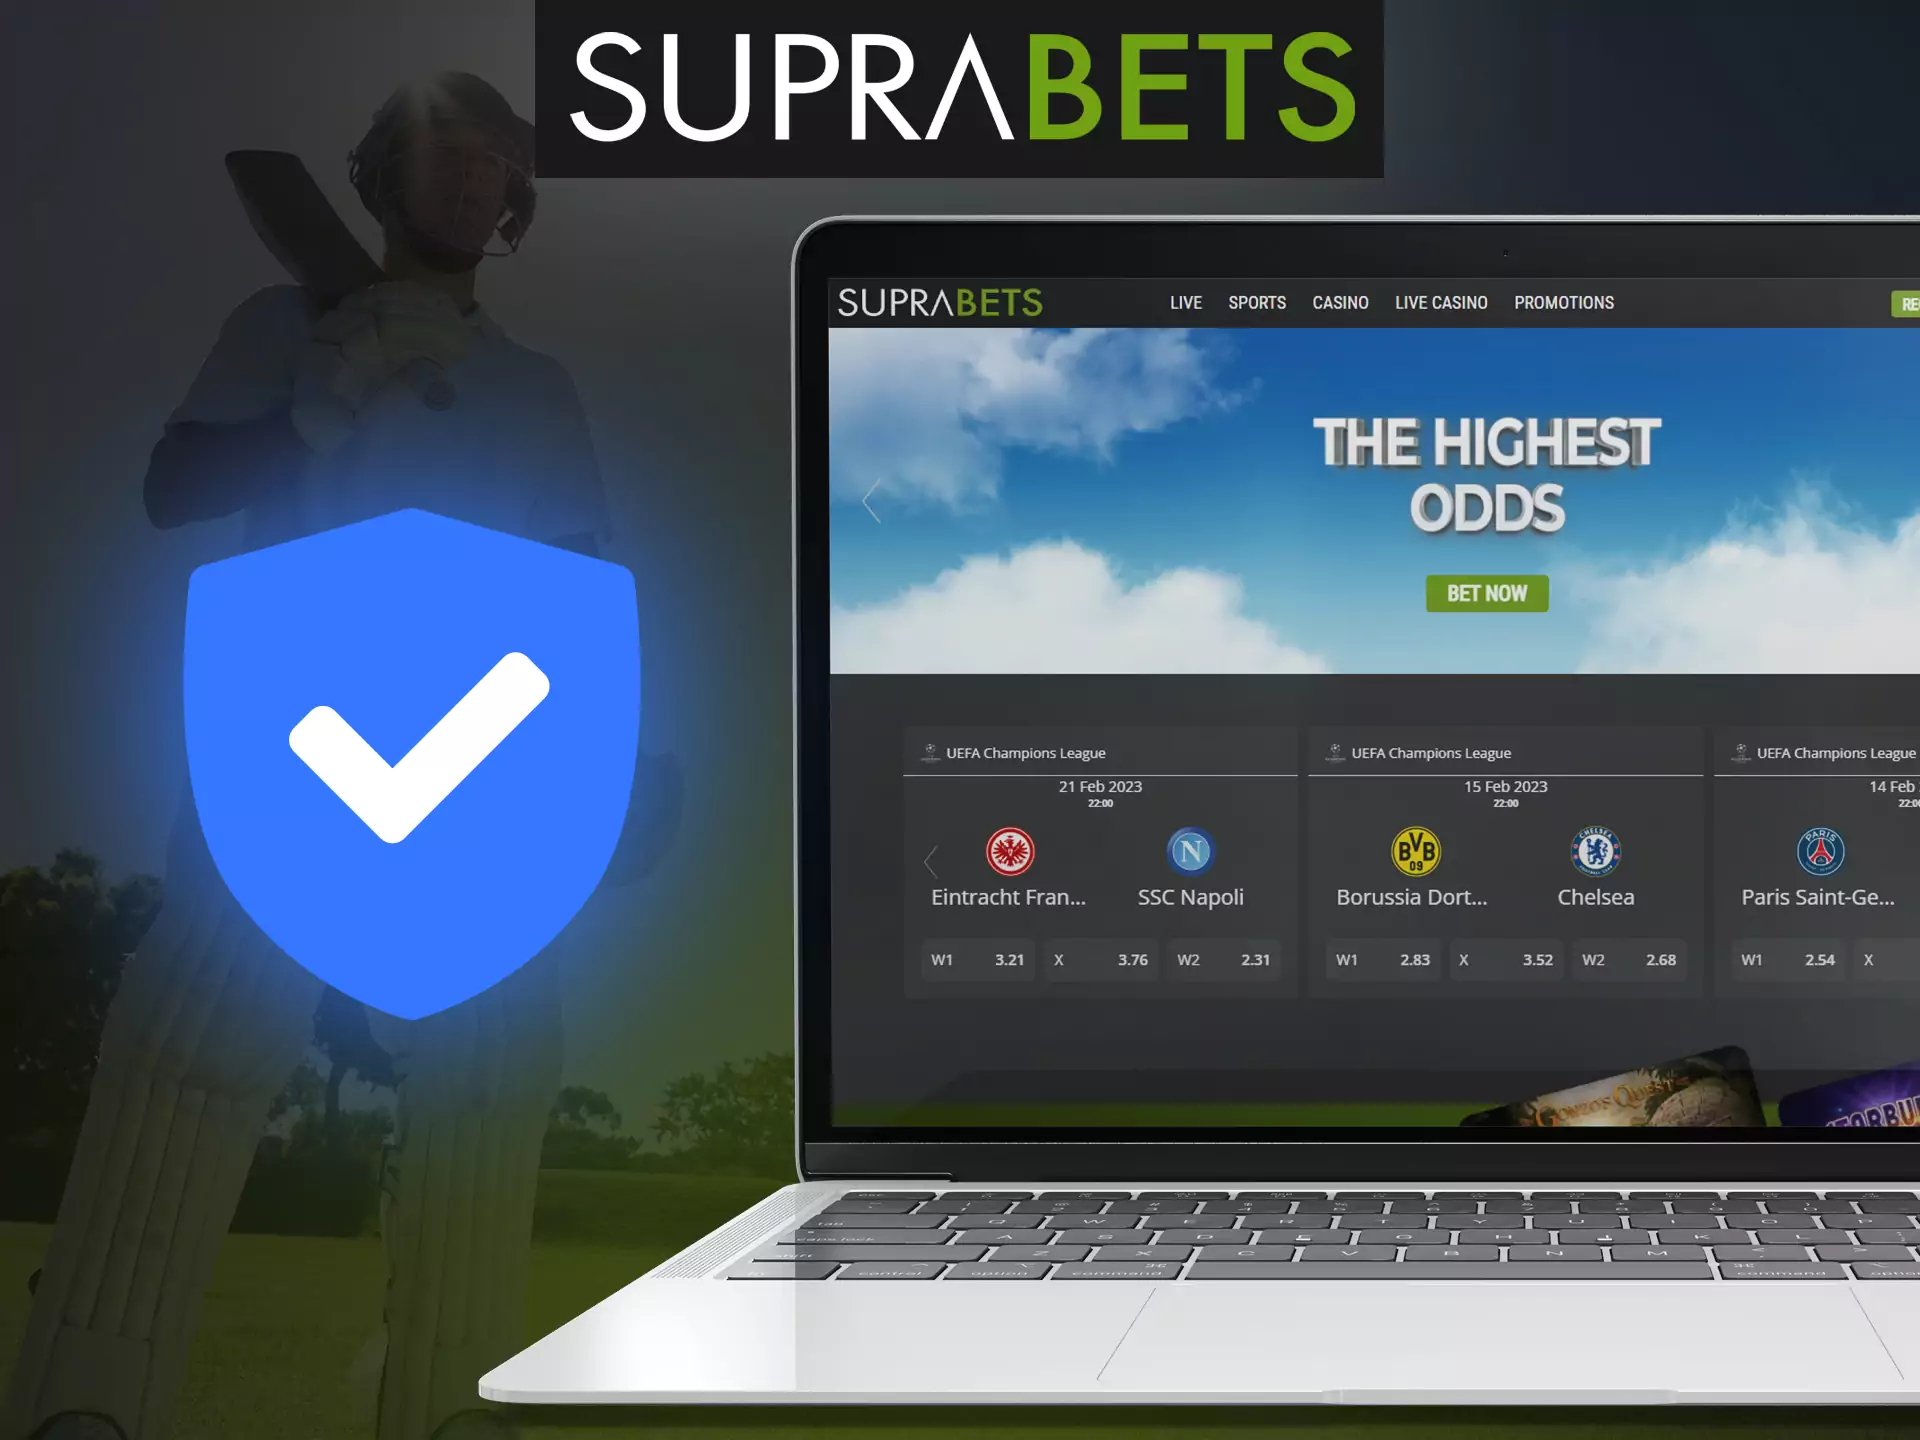 Suprabets is safe for players, all data will be protected.